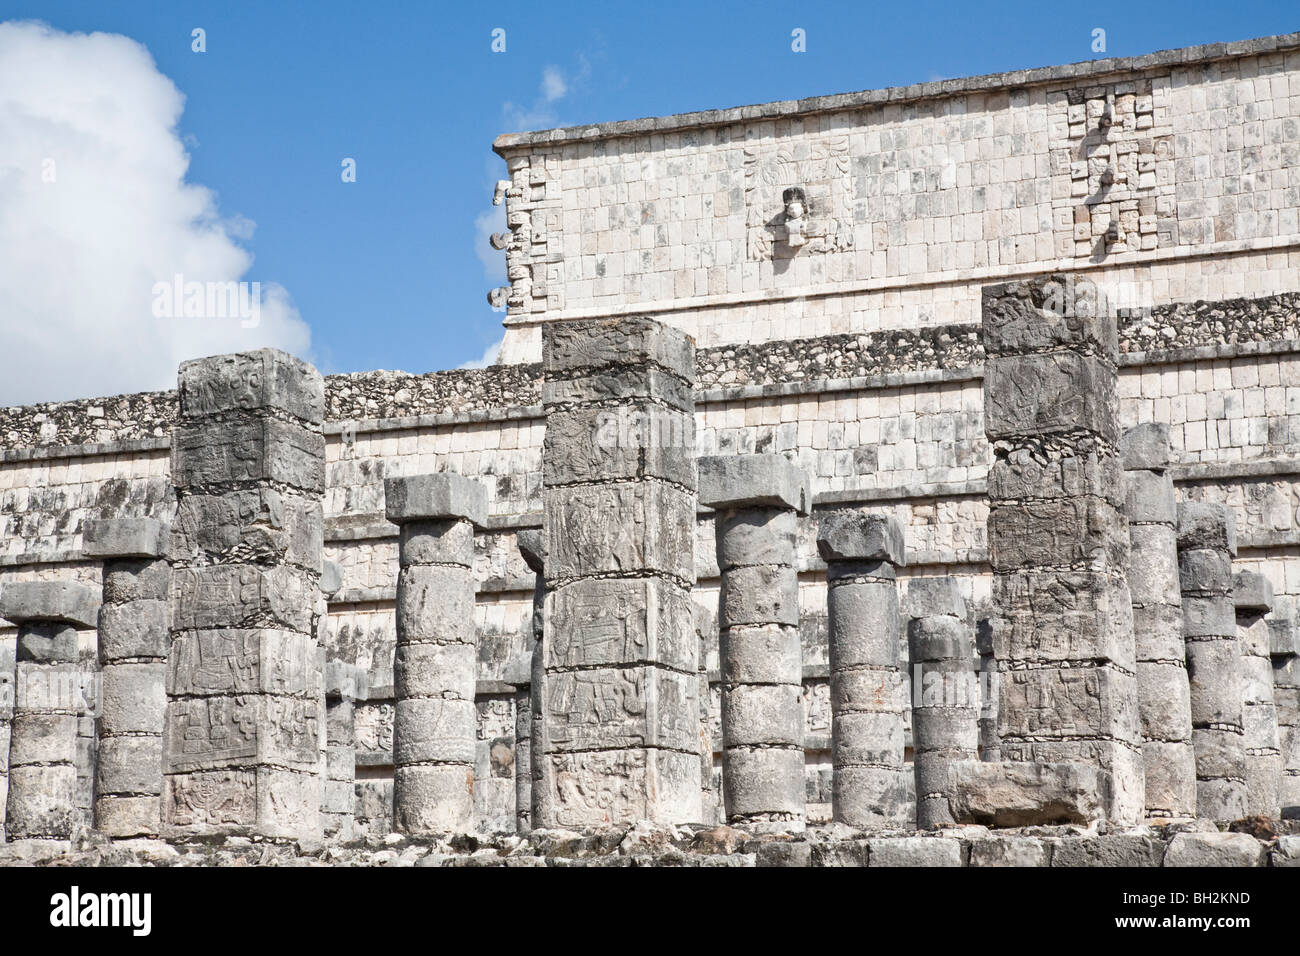 Temple of the Warriors and part of the Group Of A Thousand Columns. Chichen Itza Archaeological Site Yucatan Mexico. Stock Photo